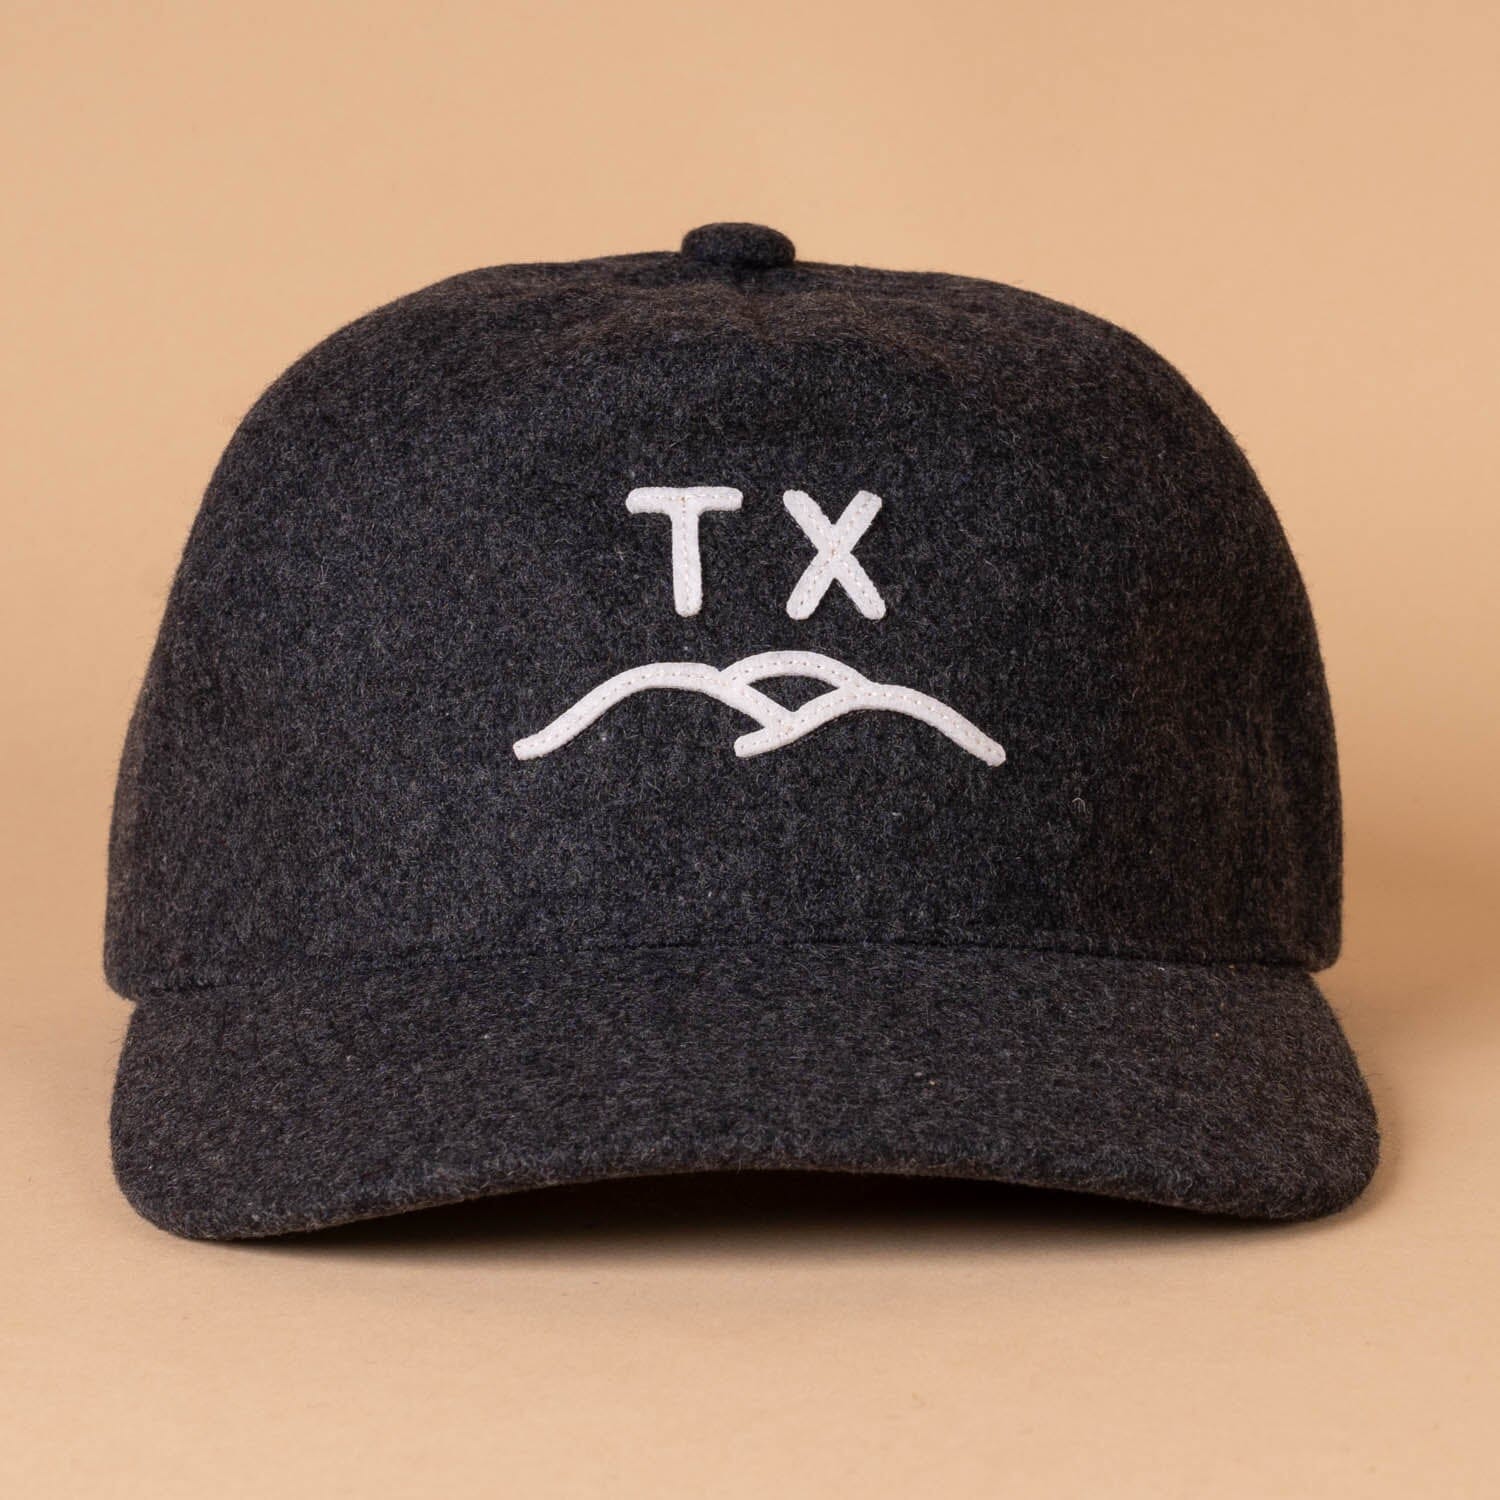 TX Hills Shepherd Strapback Texas Hill Country Provisions Heather Gray Wool Blend Unstructured